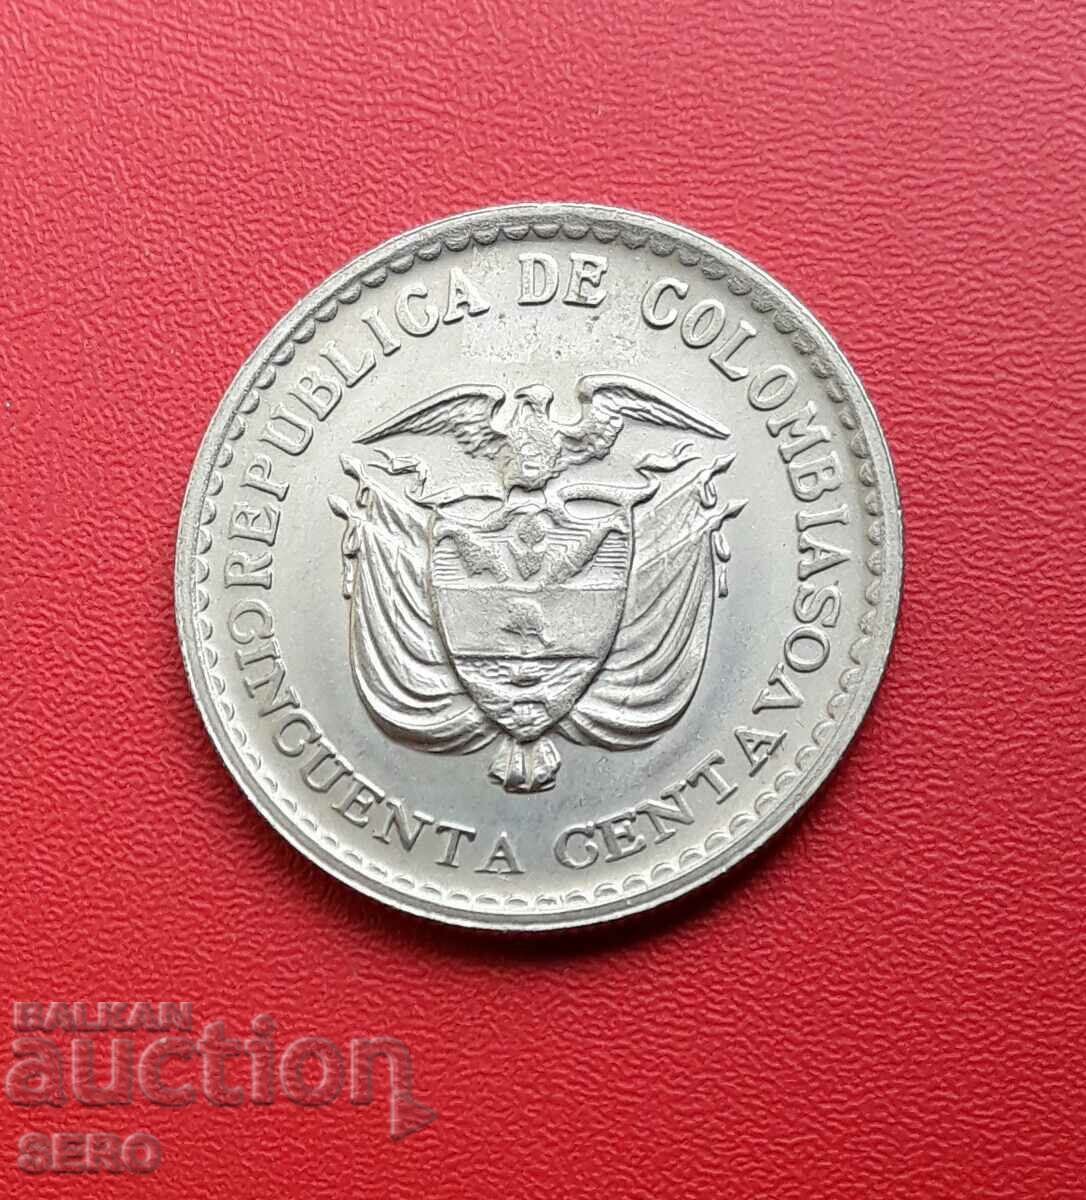 Colombia-50 centavos 1965-ext. preserved